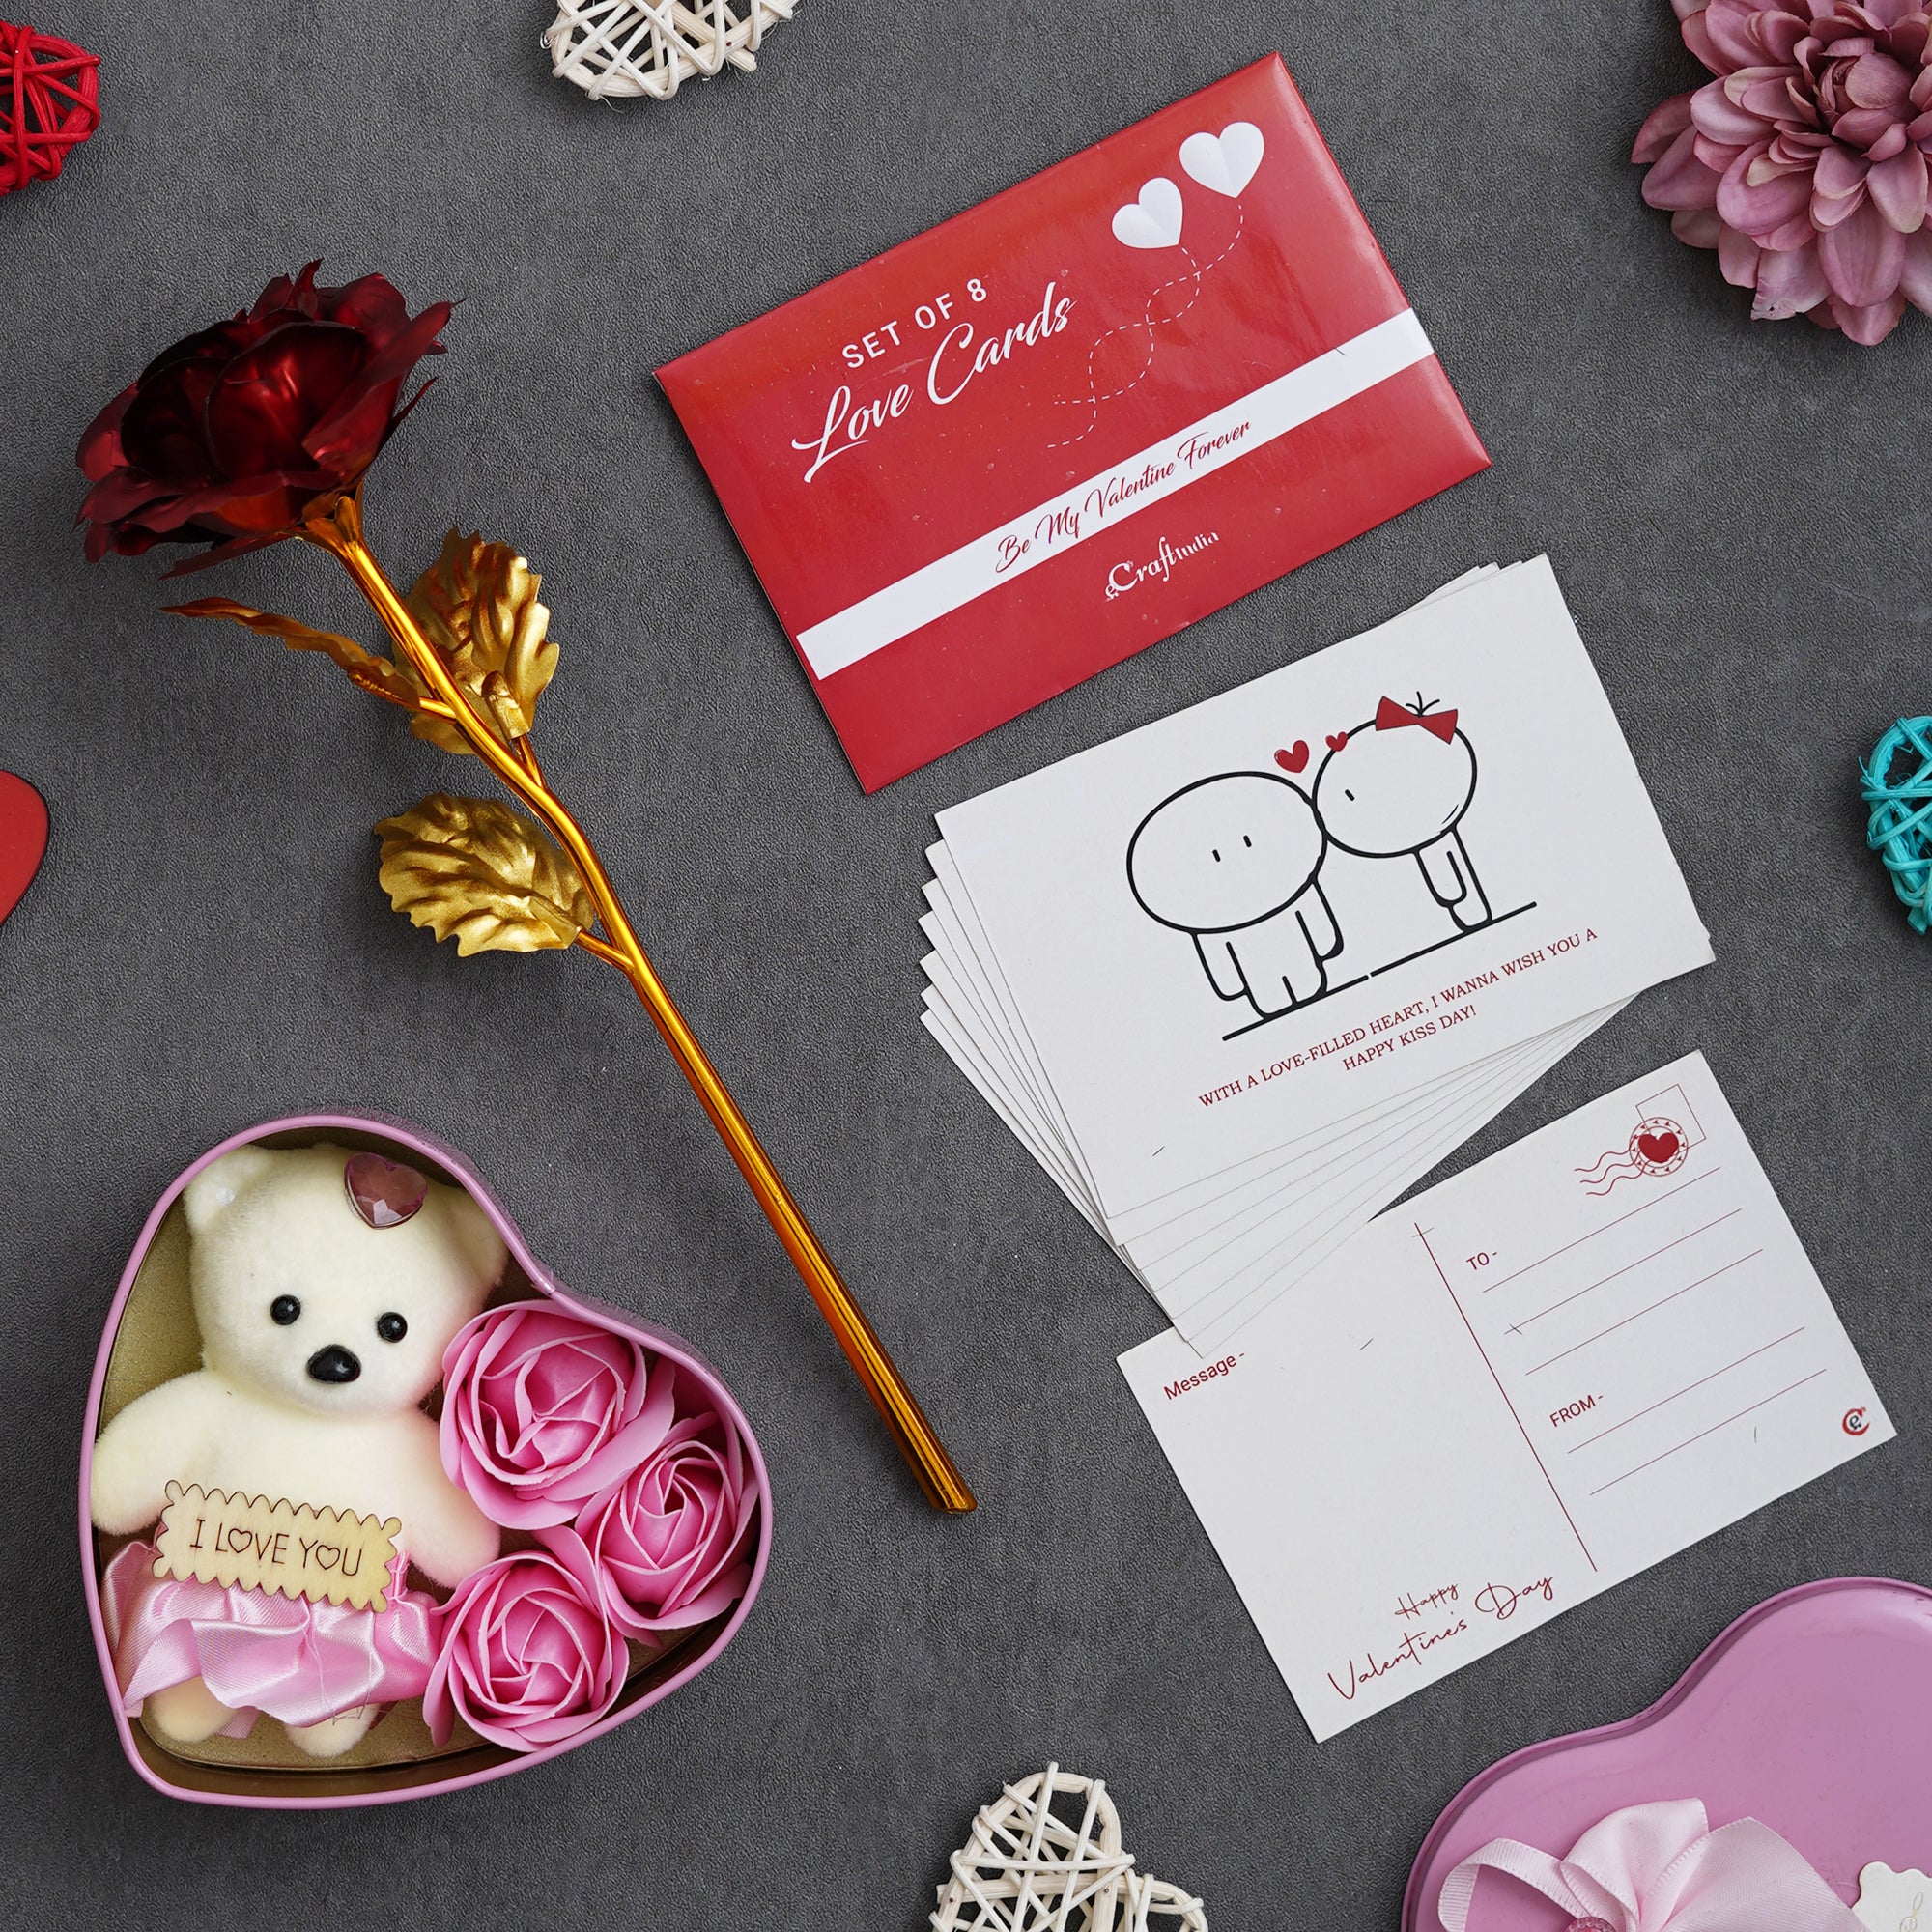 Valentine Combo of Set of 8 Love Post Cards Gift Cards Set, Golden Red Rose Gift Set, Pink Heart Shaped Gift Box with Teddy and Roses